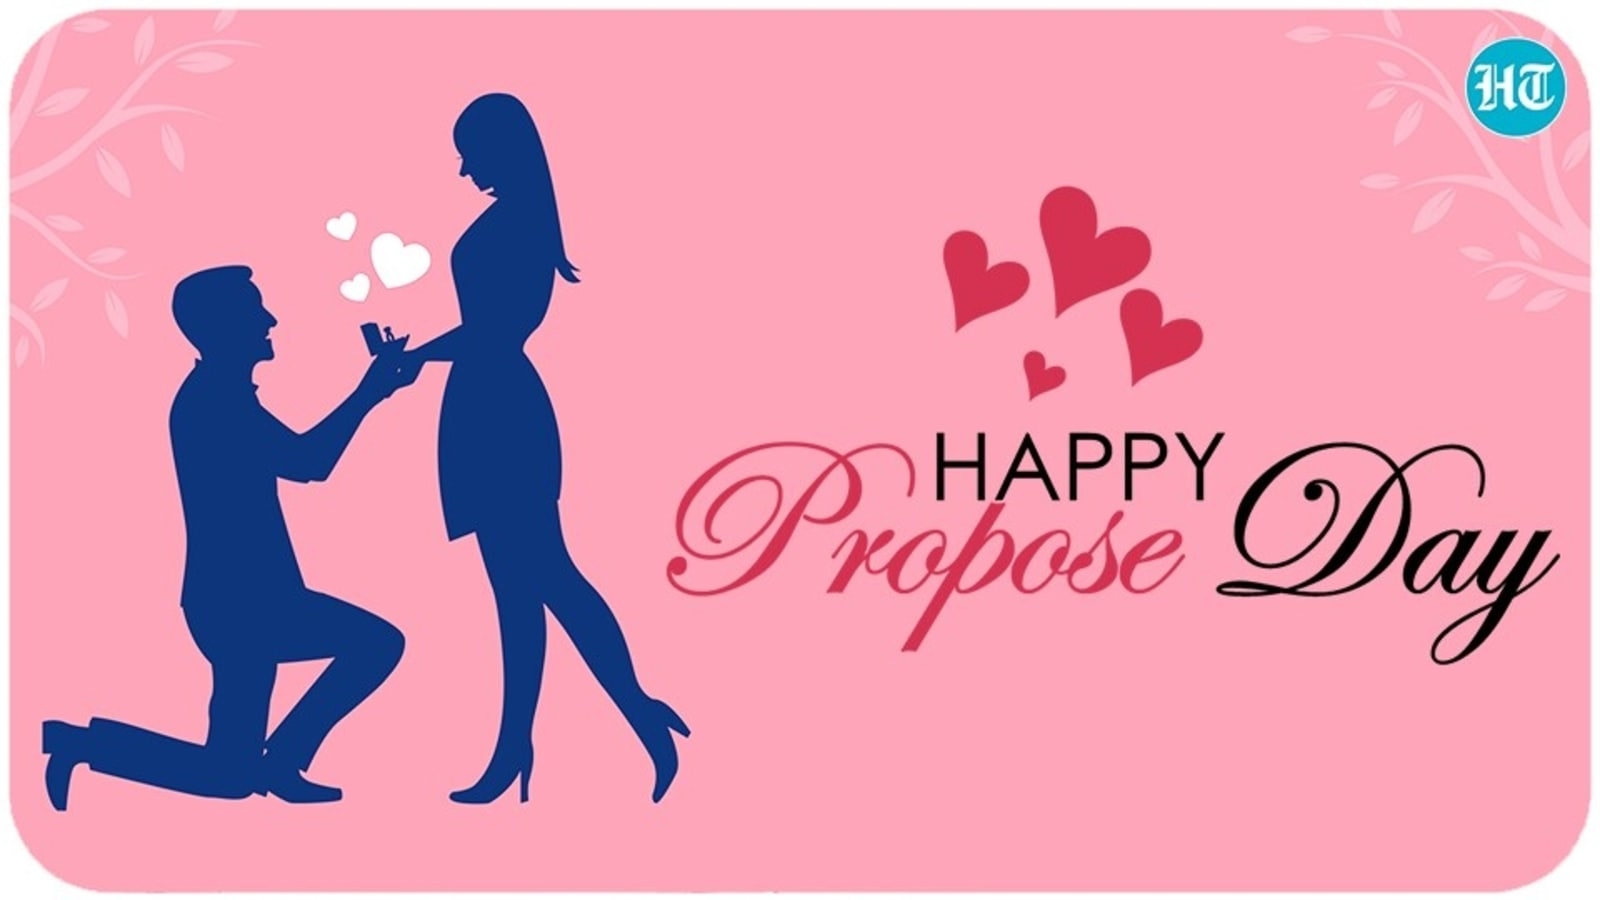 Top 999+ propose day quotes images – Amazing Collection propose day quotes images Full 4K